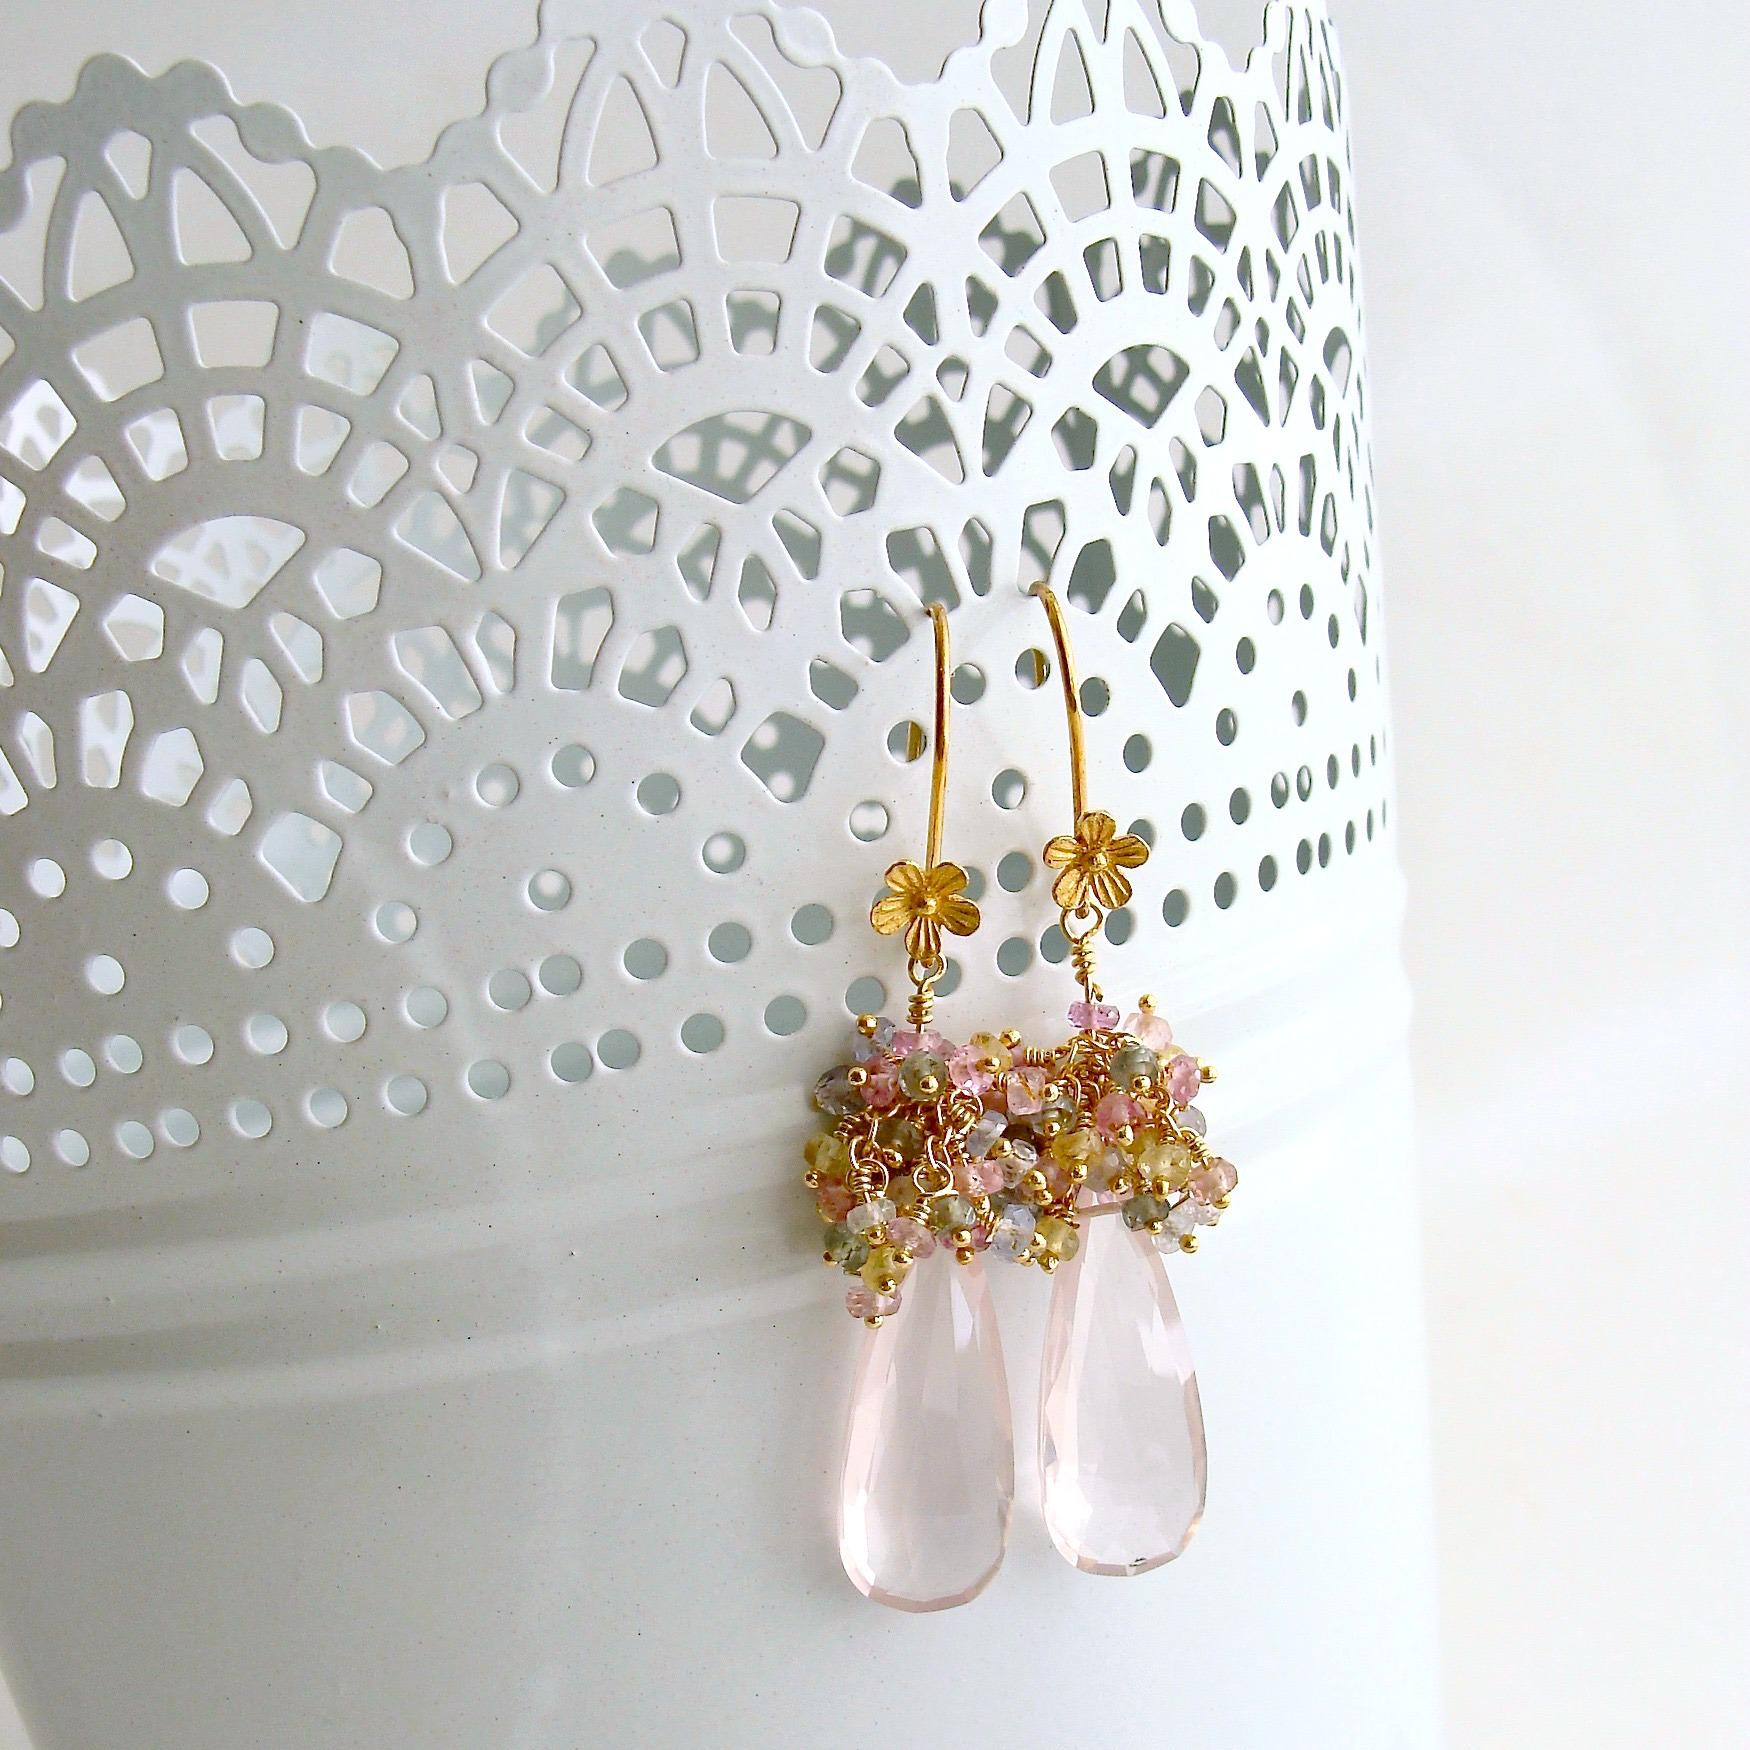 Softly colored rose quartz faceted elongated teardrops have been topped with a cascade of delicate pastel sapphire tendrils creating a pair of romantic fairy tale earrings.  The gold vermeil earrings have been paired with an ear wire featuring a